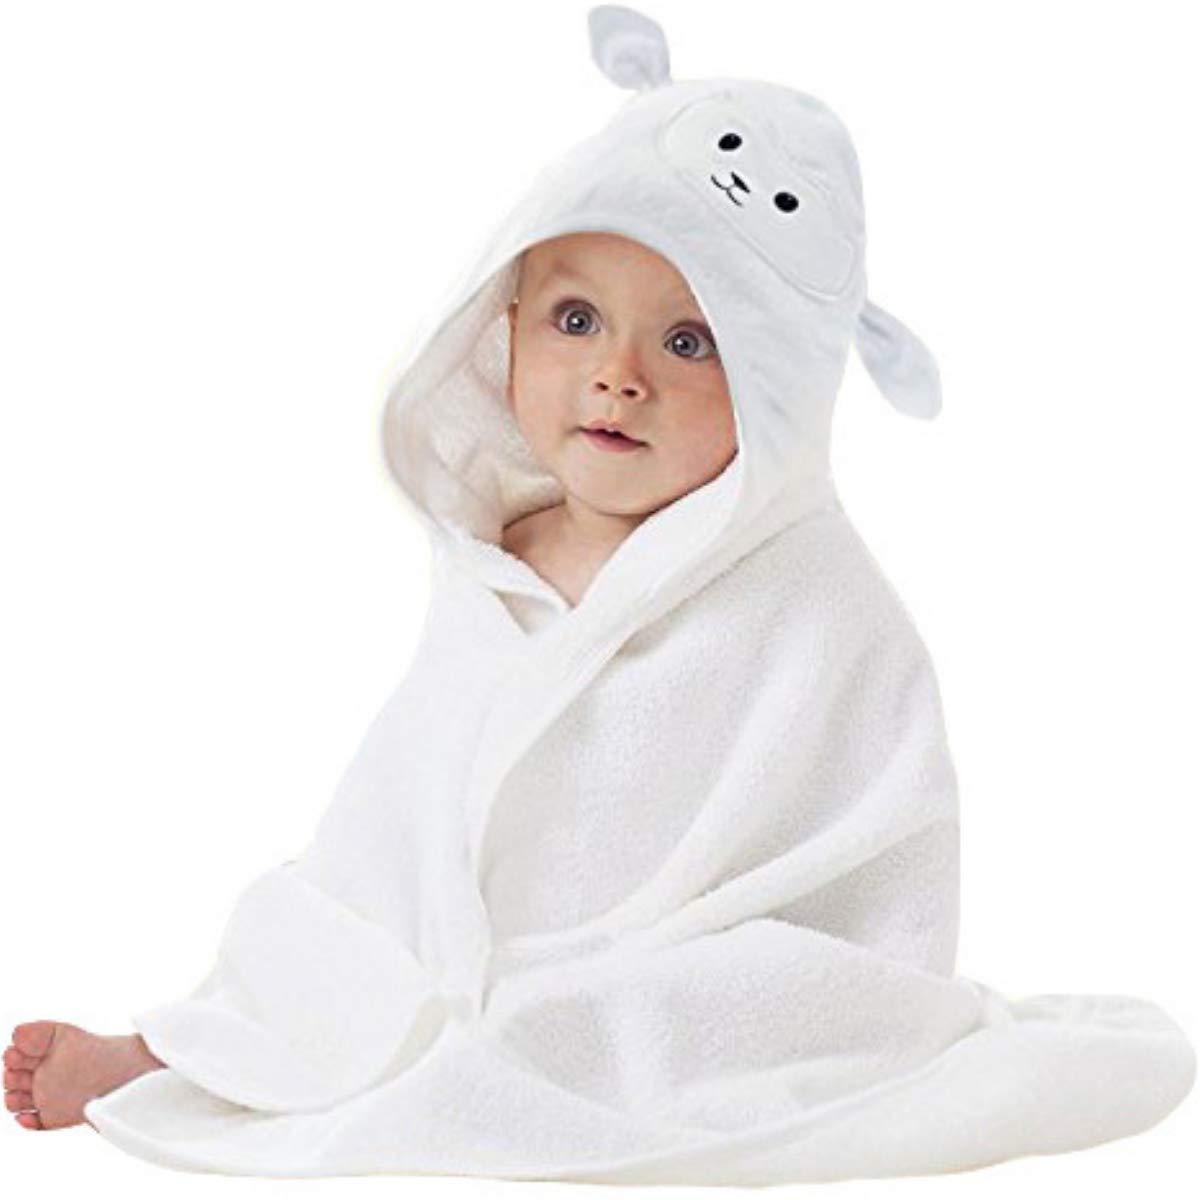 Ordinary Discount Cleaning White Towels - Luxury New Design Wholesale Bath Towels bamboo fiber Quick-Dry Kids Hooded For Children Towel BT1 – Honest